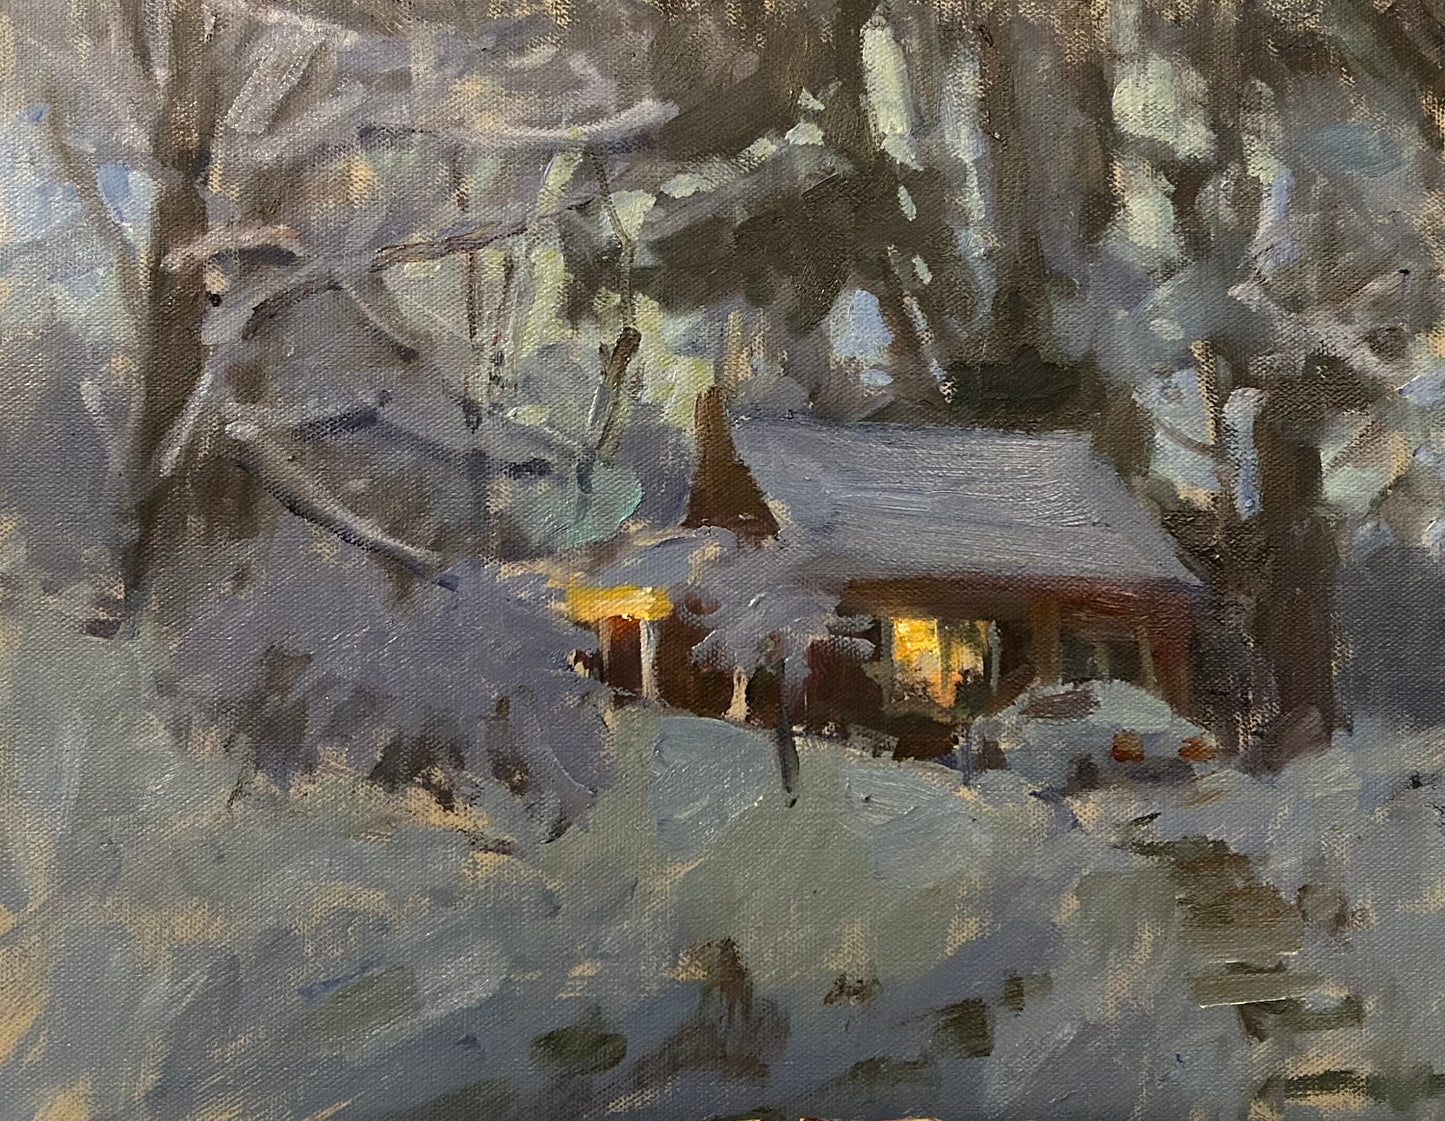 Home at Twilight (11 x 14 Inches)